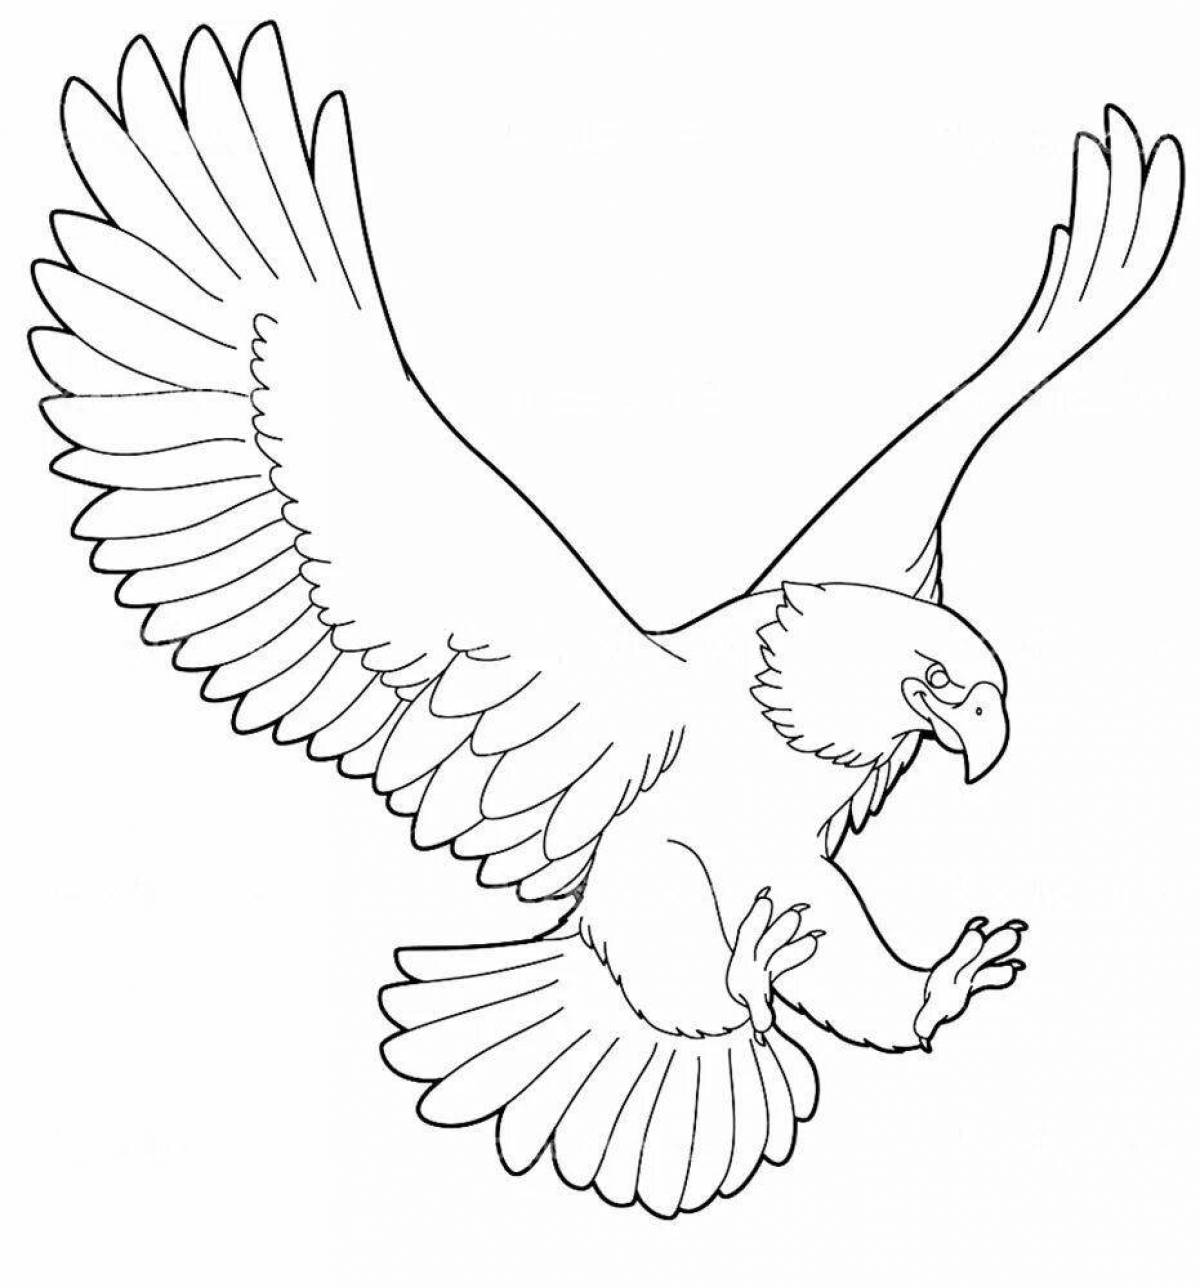 Coloring book brightly colored white-tailed eagle